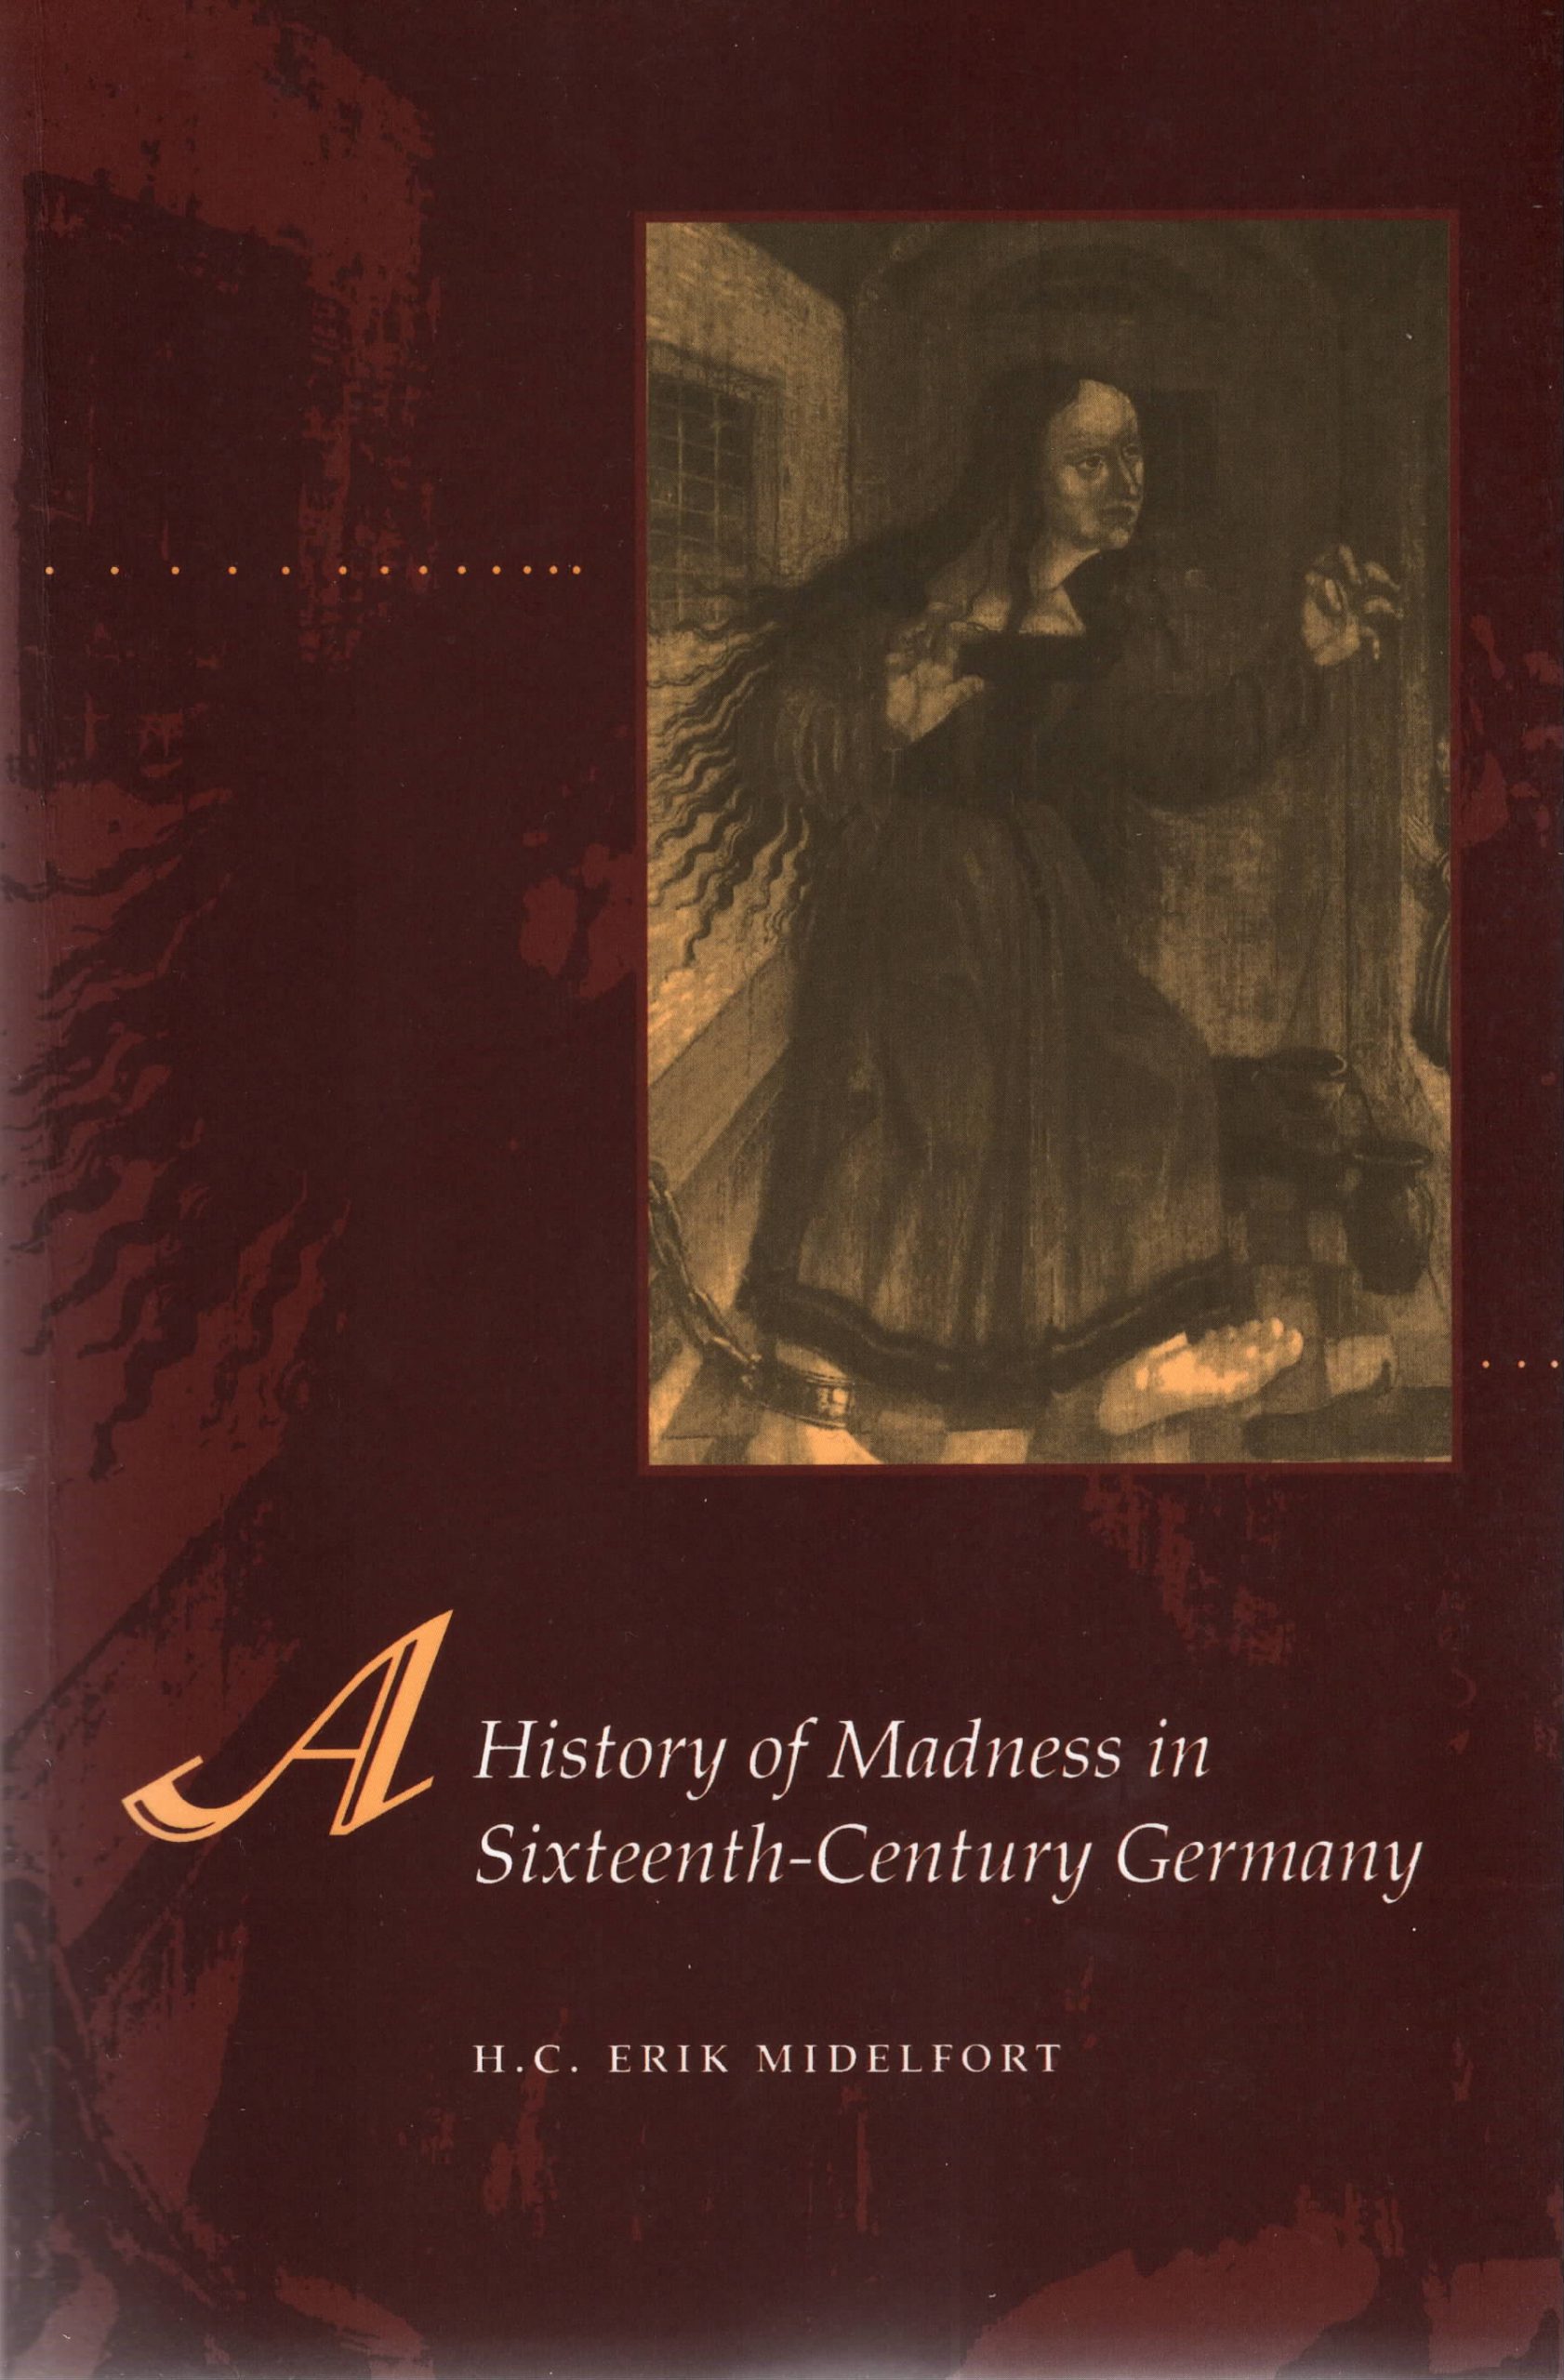 A history of madness in sixteenth-century Germany